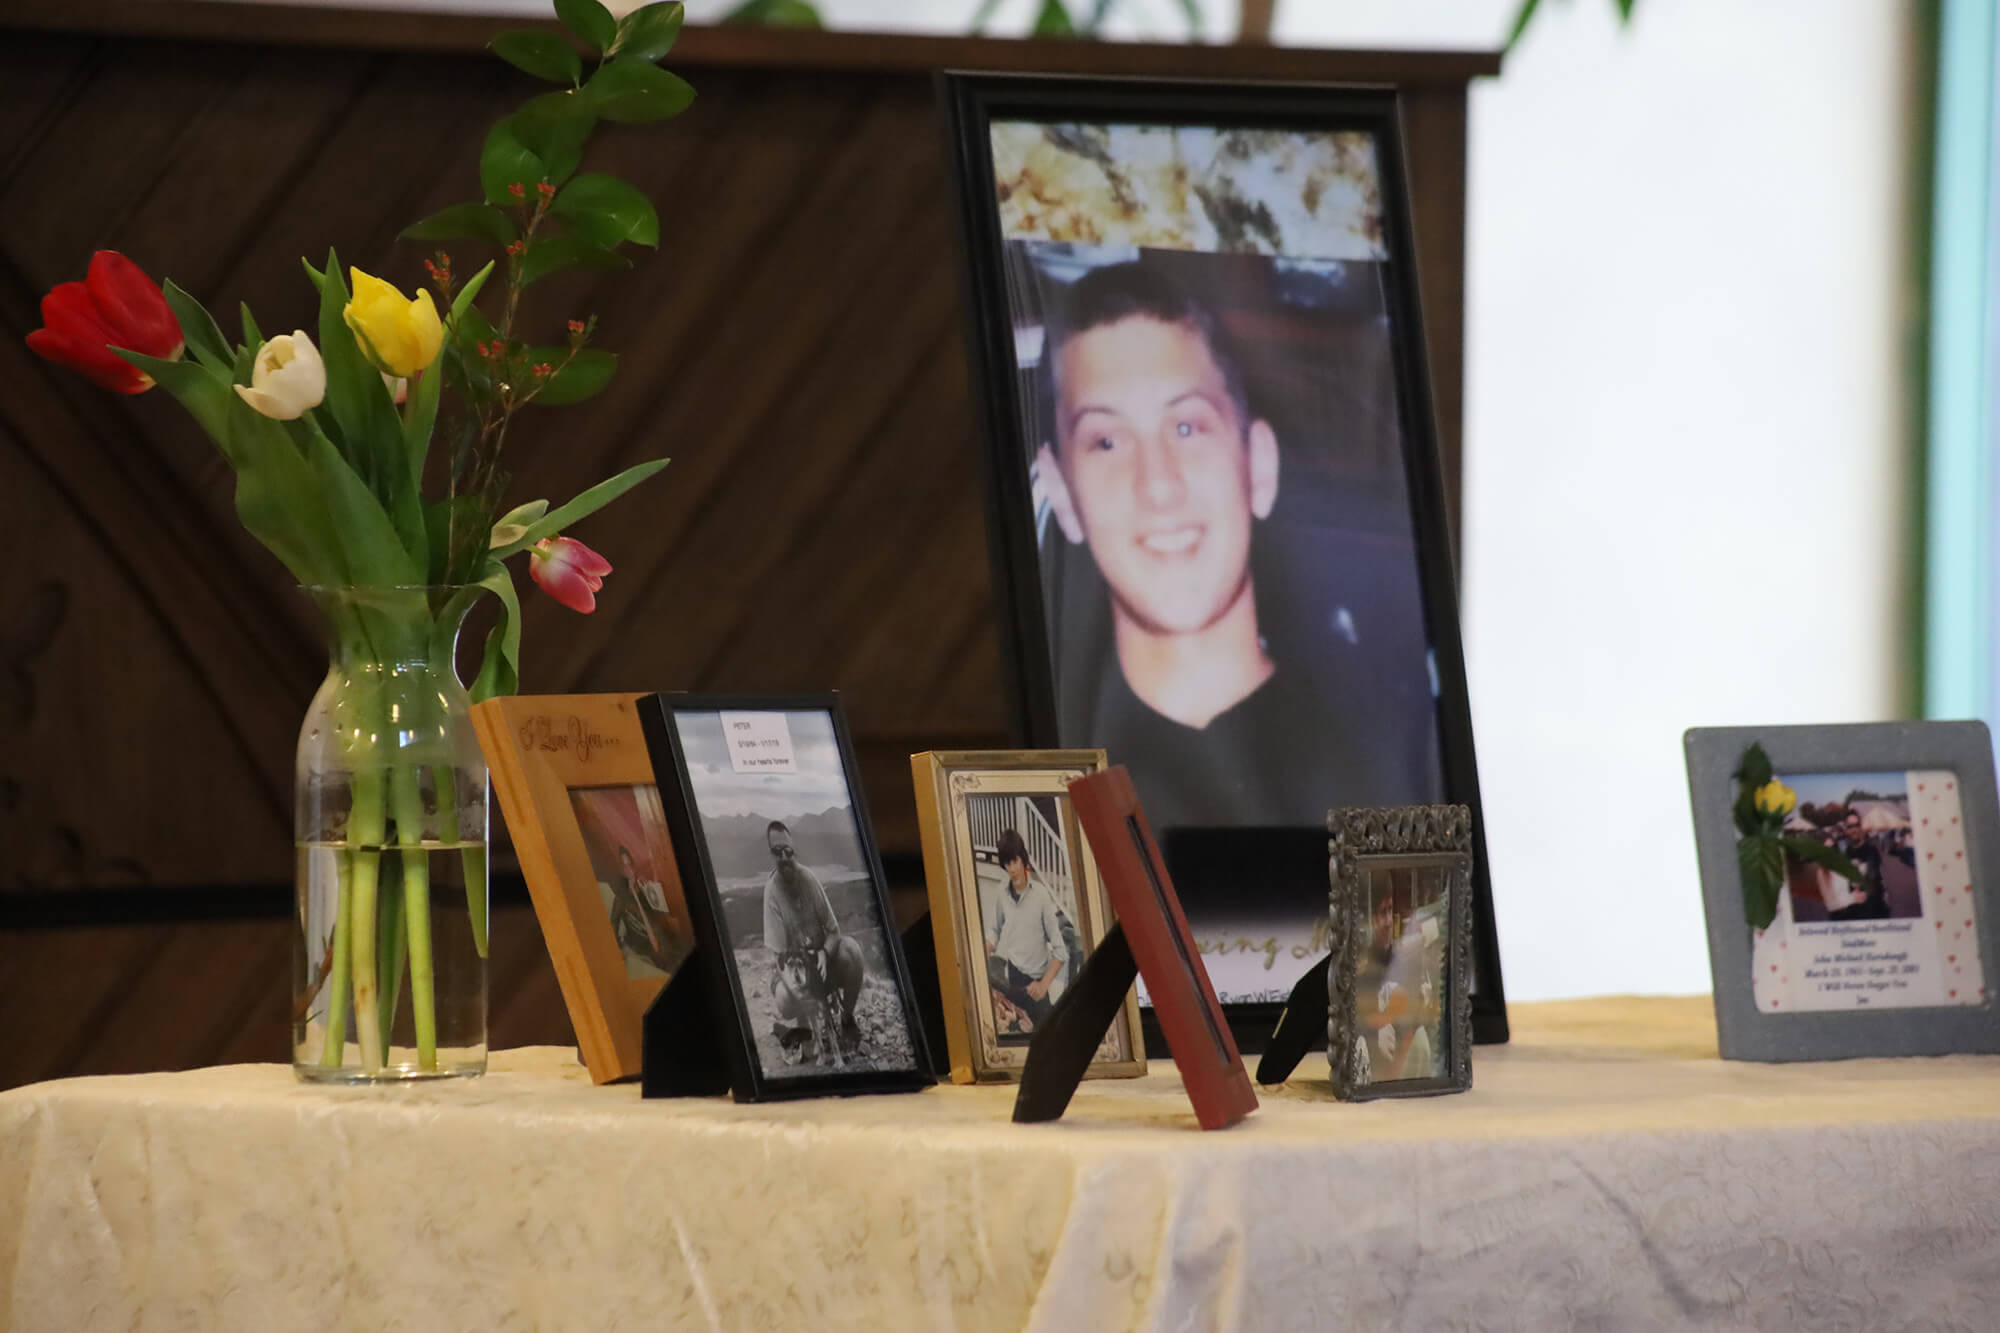 A memorial table with framed photos and a vase of flowers.